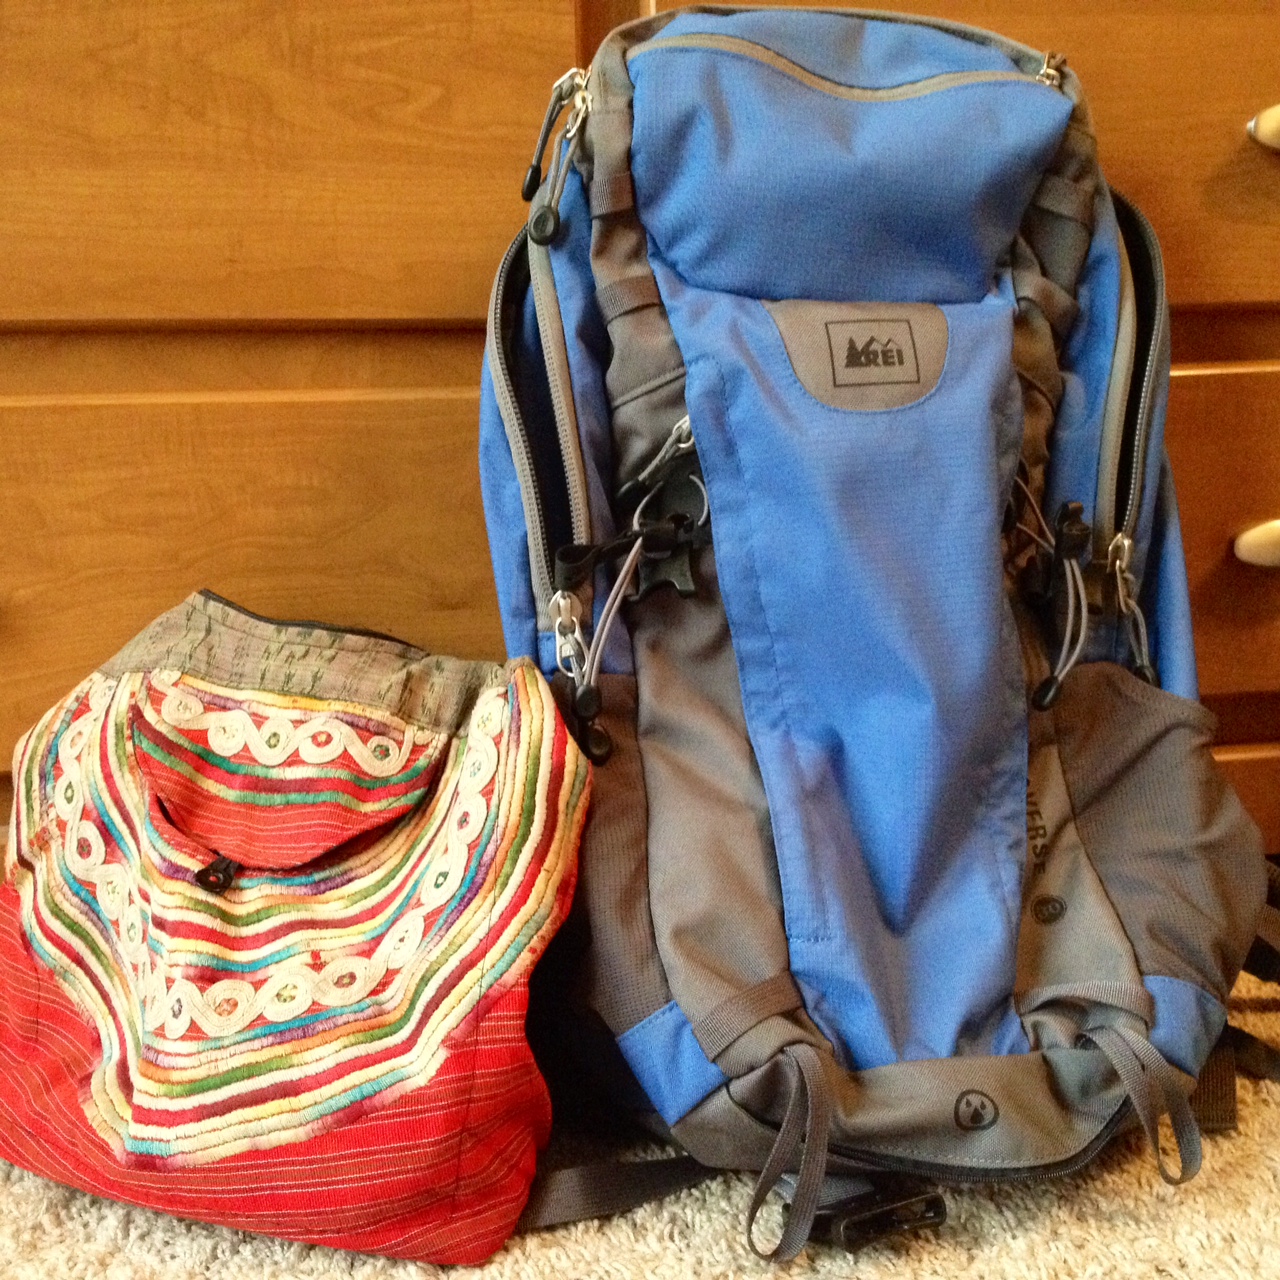 Packing list for Europe with just a 30L backpack #travel #backpackers | bluesyemre